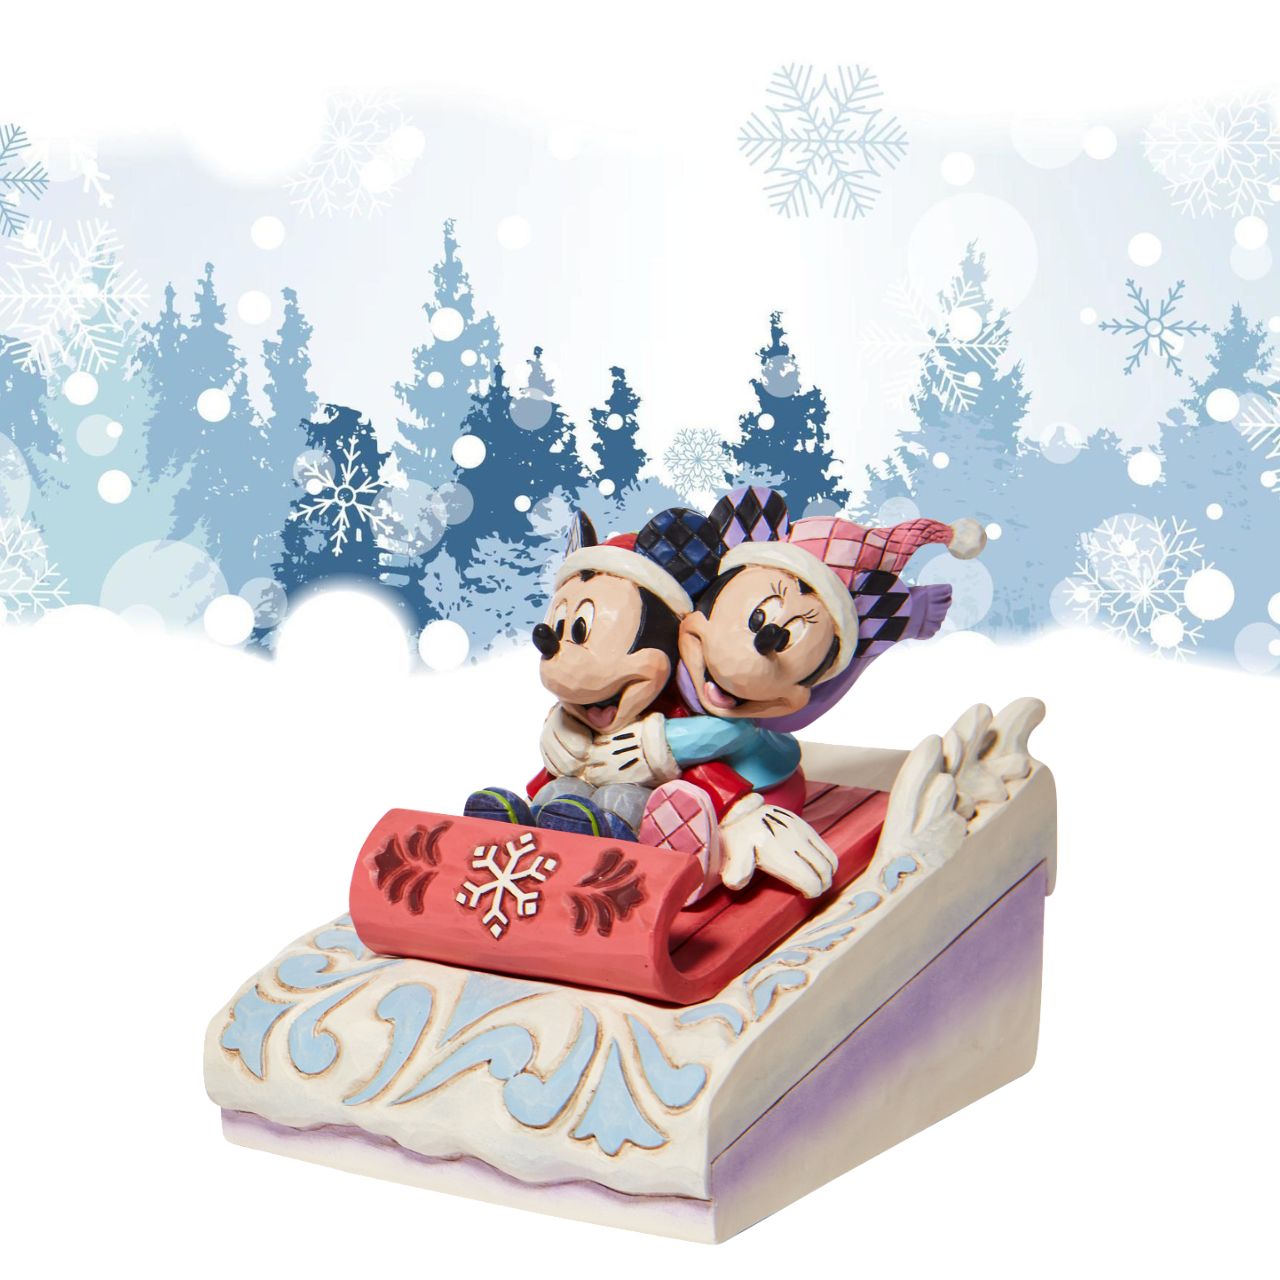 Jim Shore Disney Mickey & Minnie Sledding Figurine - Sledding Sweethearts  Couples that sleigh together, stay together. Disney's original duo embrace for a sled ride down Christmas Mountain. Holding her guy tight, Minnie clings onto Mickey as they go sliding in the snow.